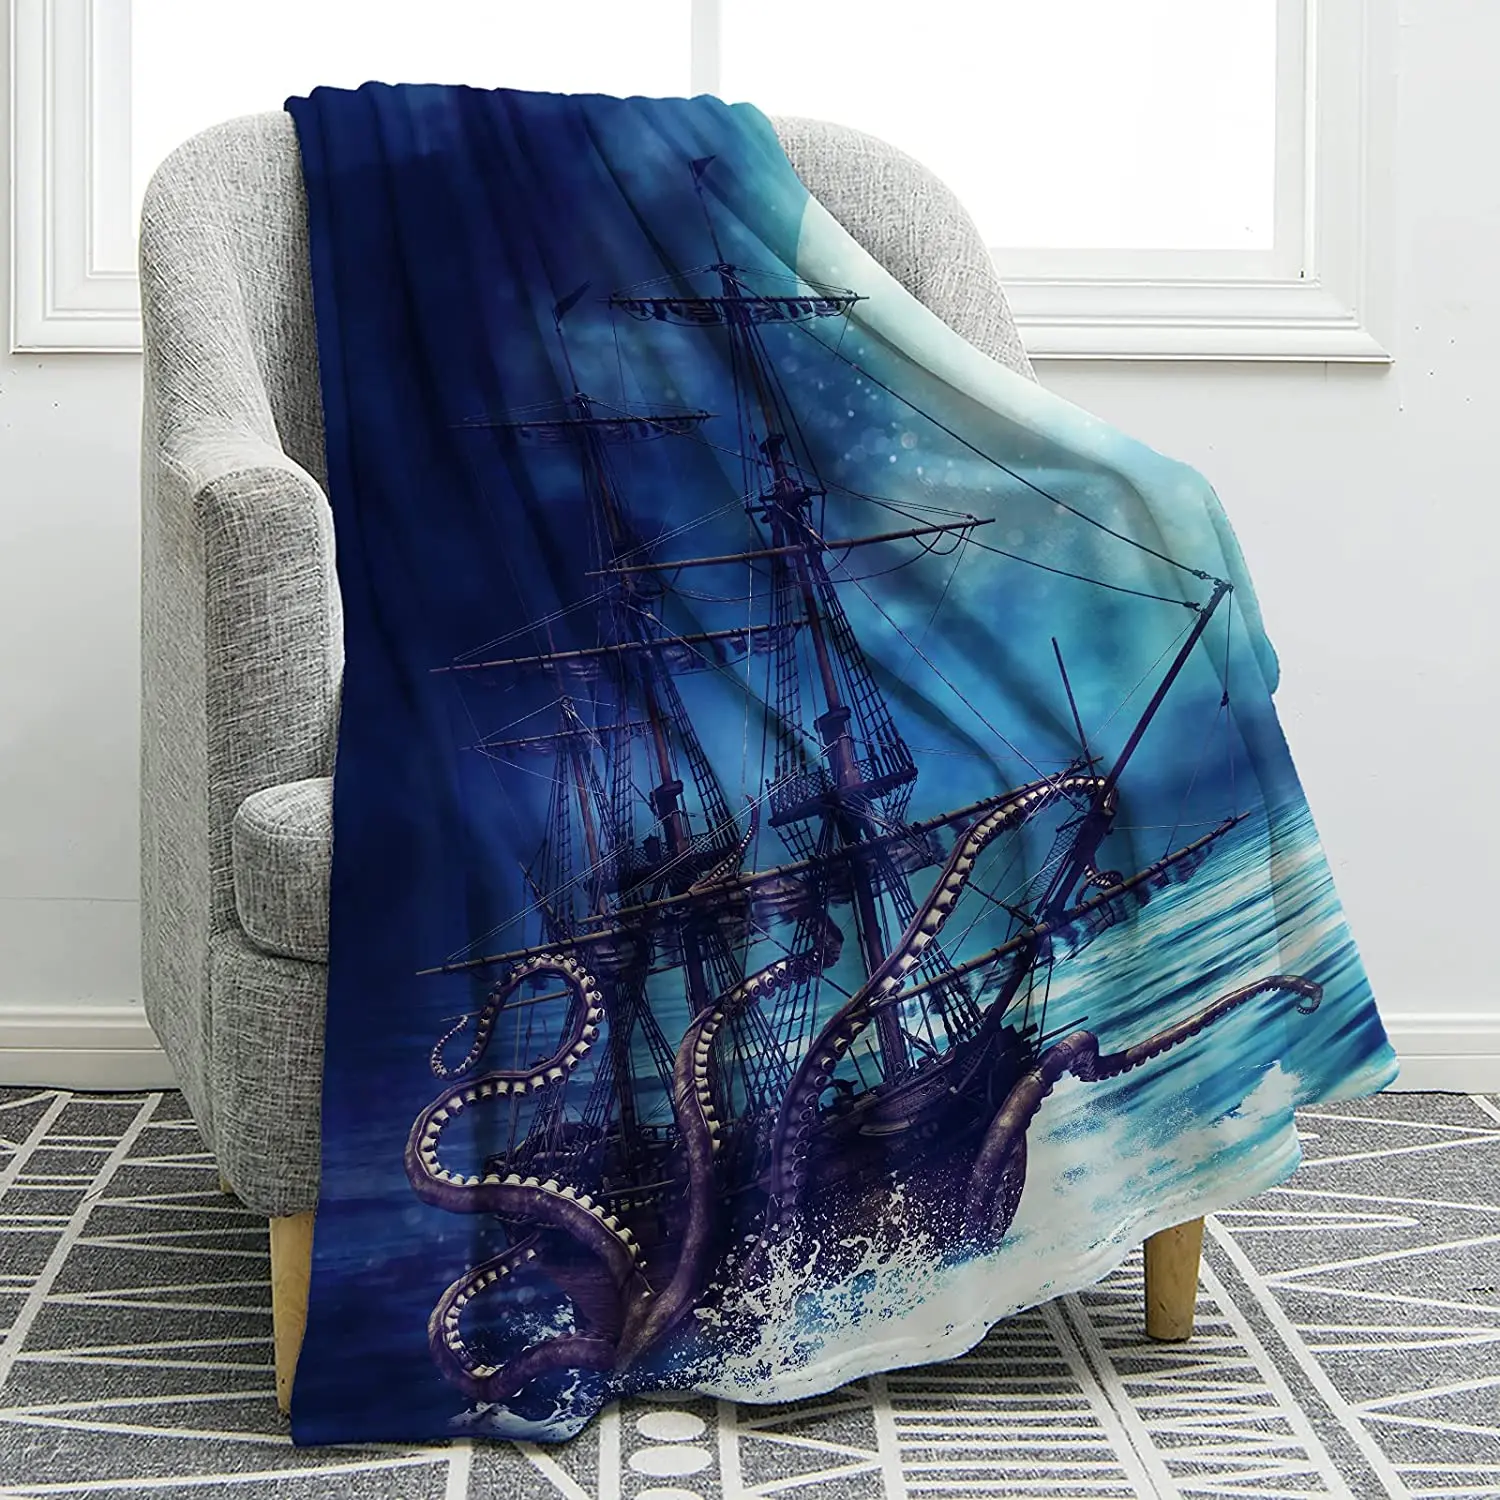 

Pirate Ship Blanket Octopus Tentacles Sailboat Wave Print Throw Blanket Lightweight Cozy Soft Print Warm for Kids Teens Gift